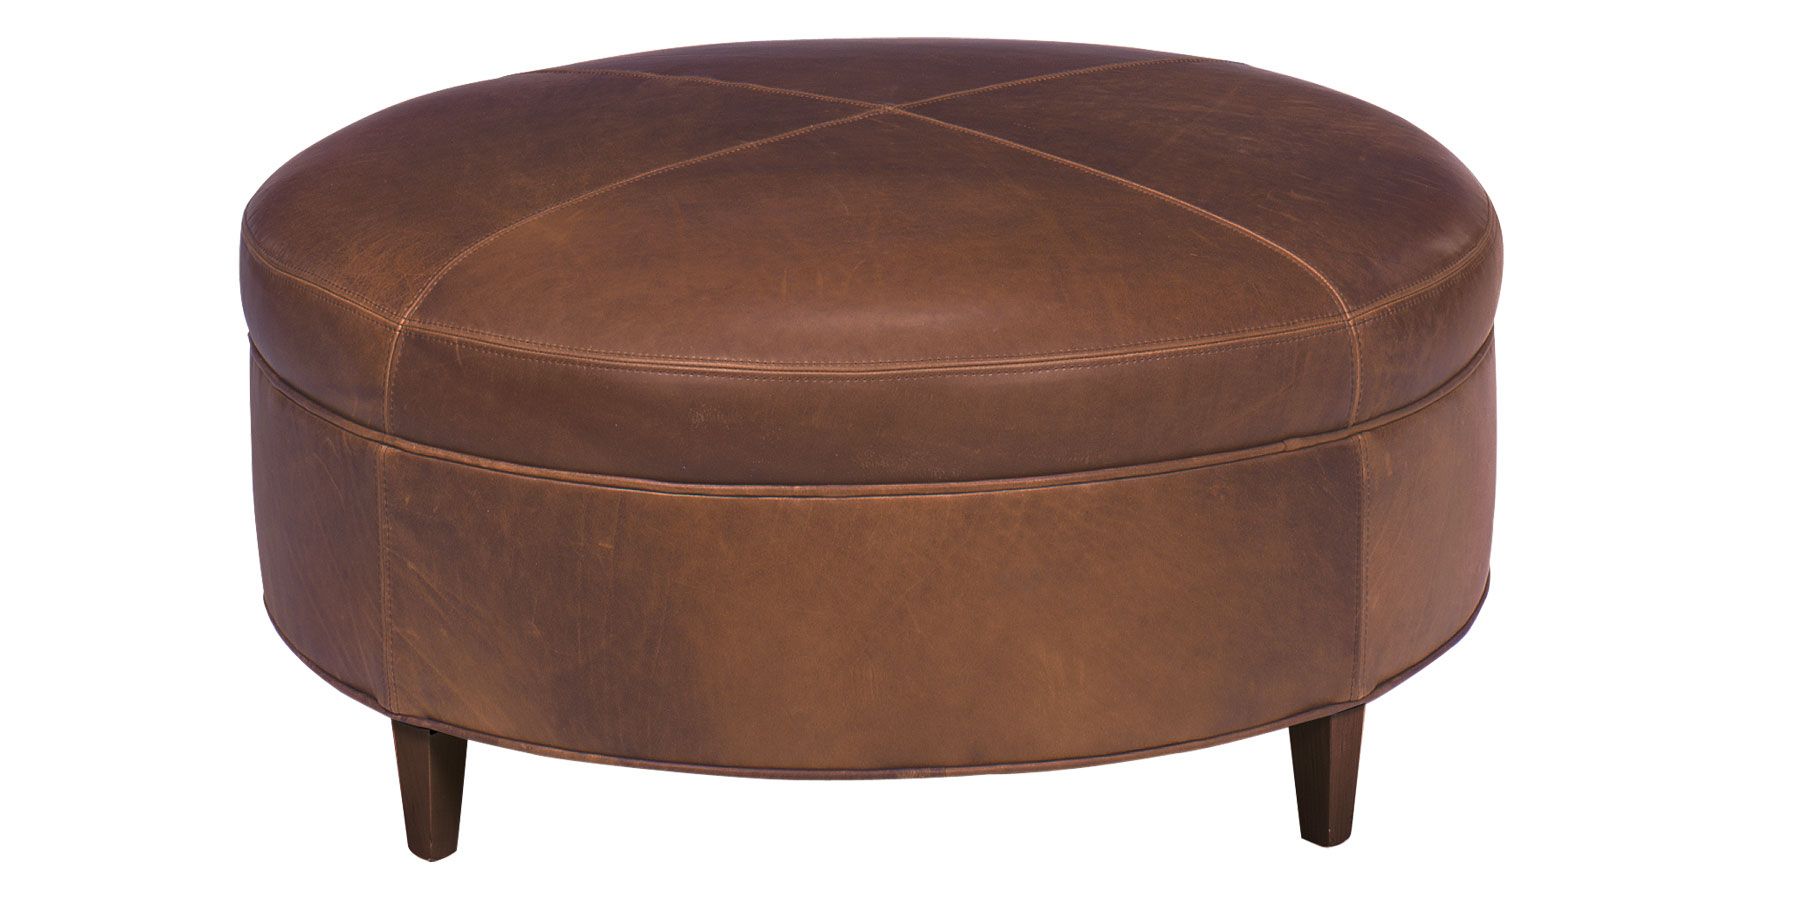 Round Contemporary Leather Cocktail Ottoman | Club Furniture With Silver And White Leather Round Ottomans (View 2 of 20)